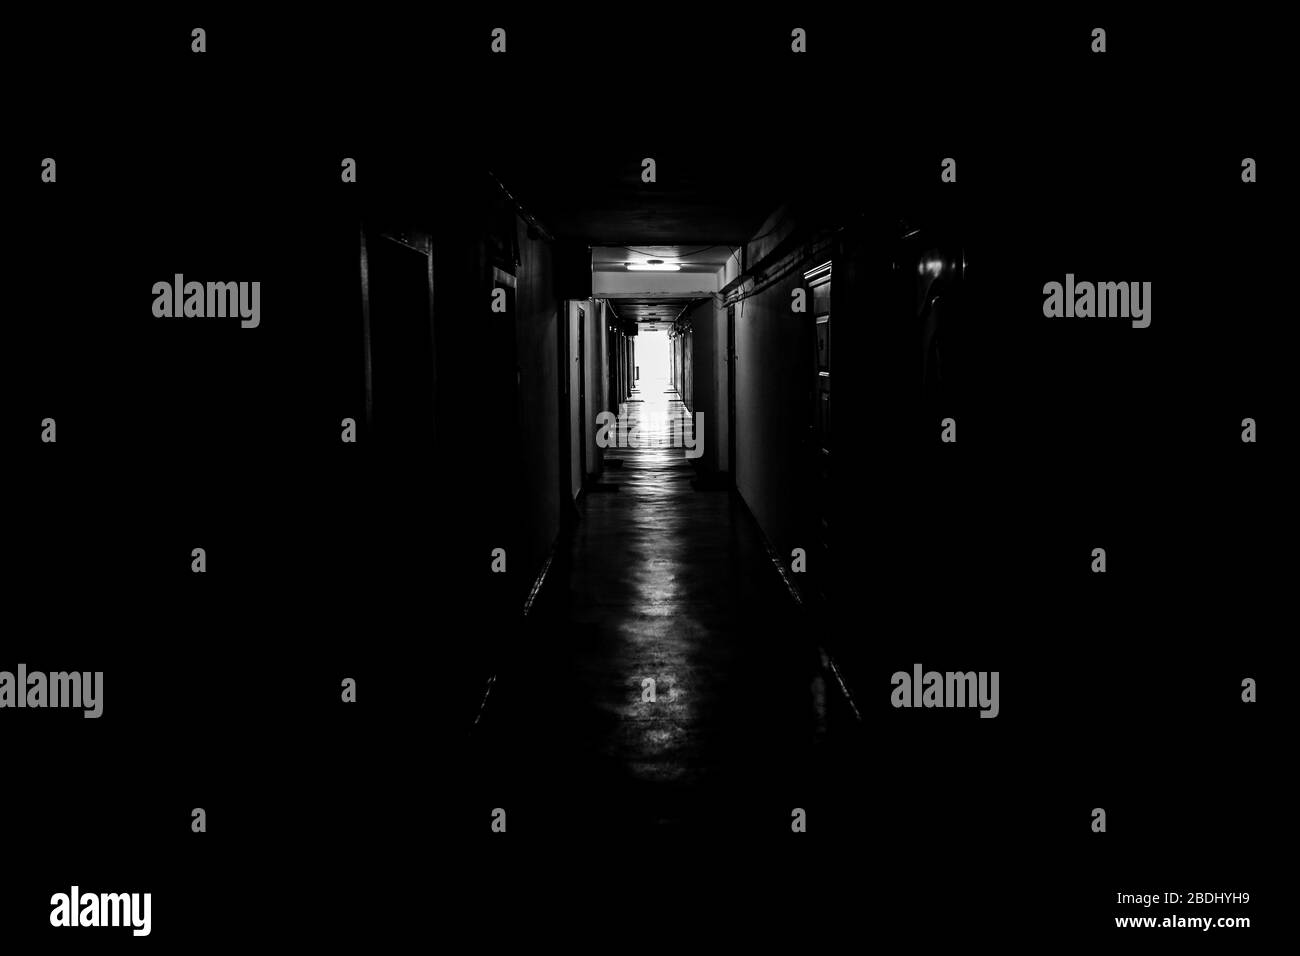 Black and white image with a dark mood hallway with apartment doors on each side - the light at the end of the tunnel. Stock Photo